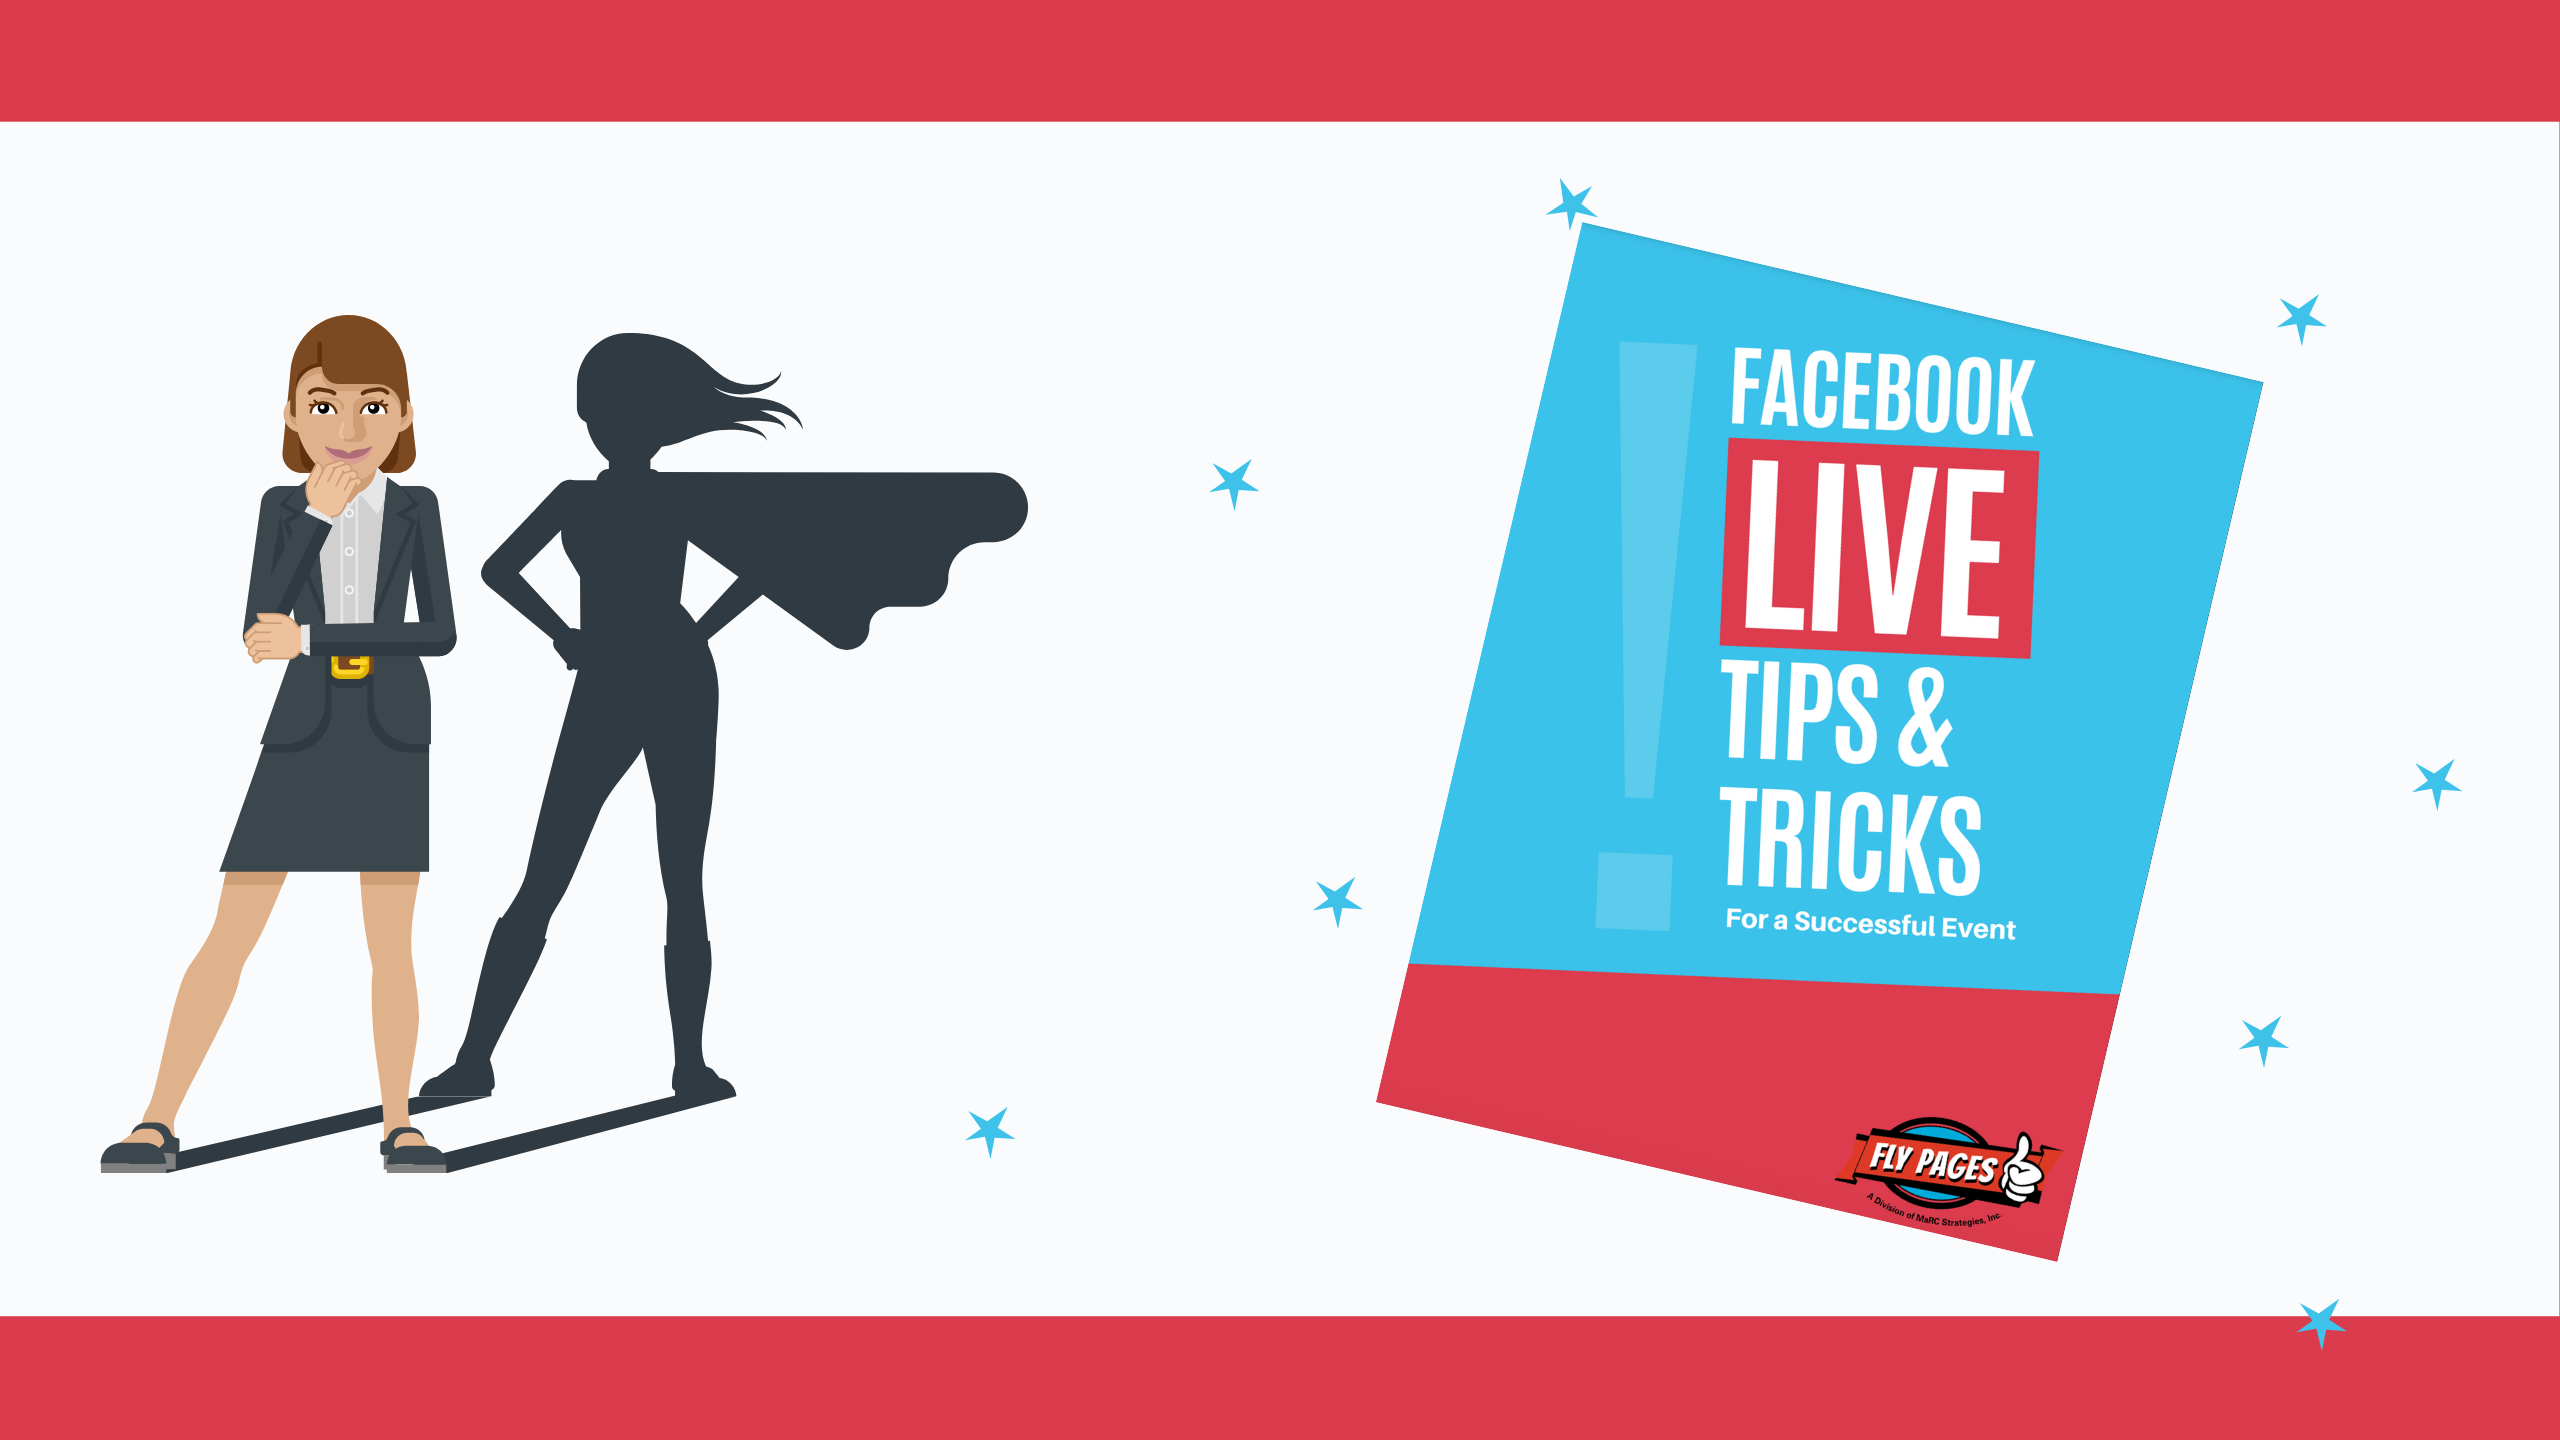 Facebook Live Tips and Tricks